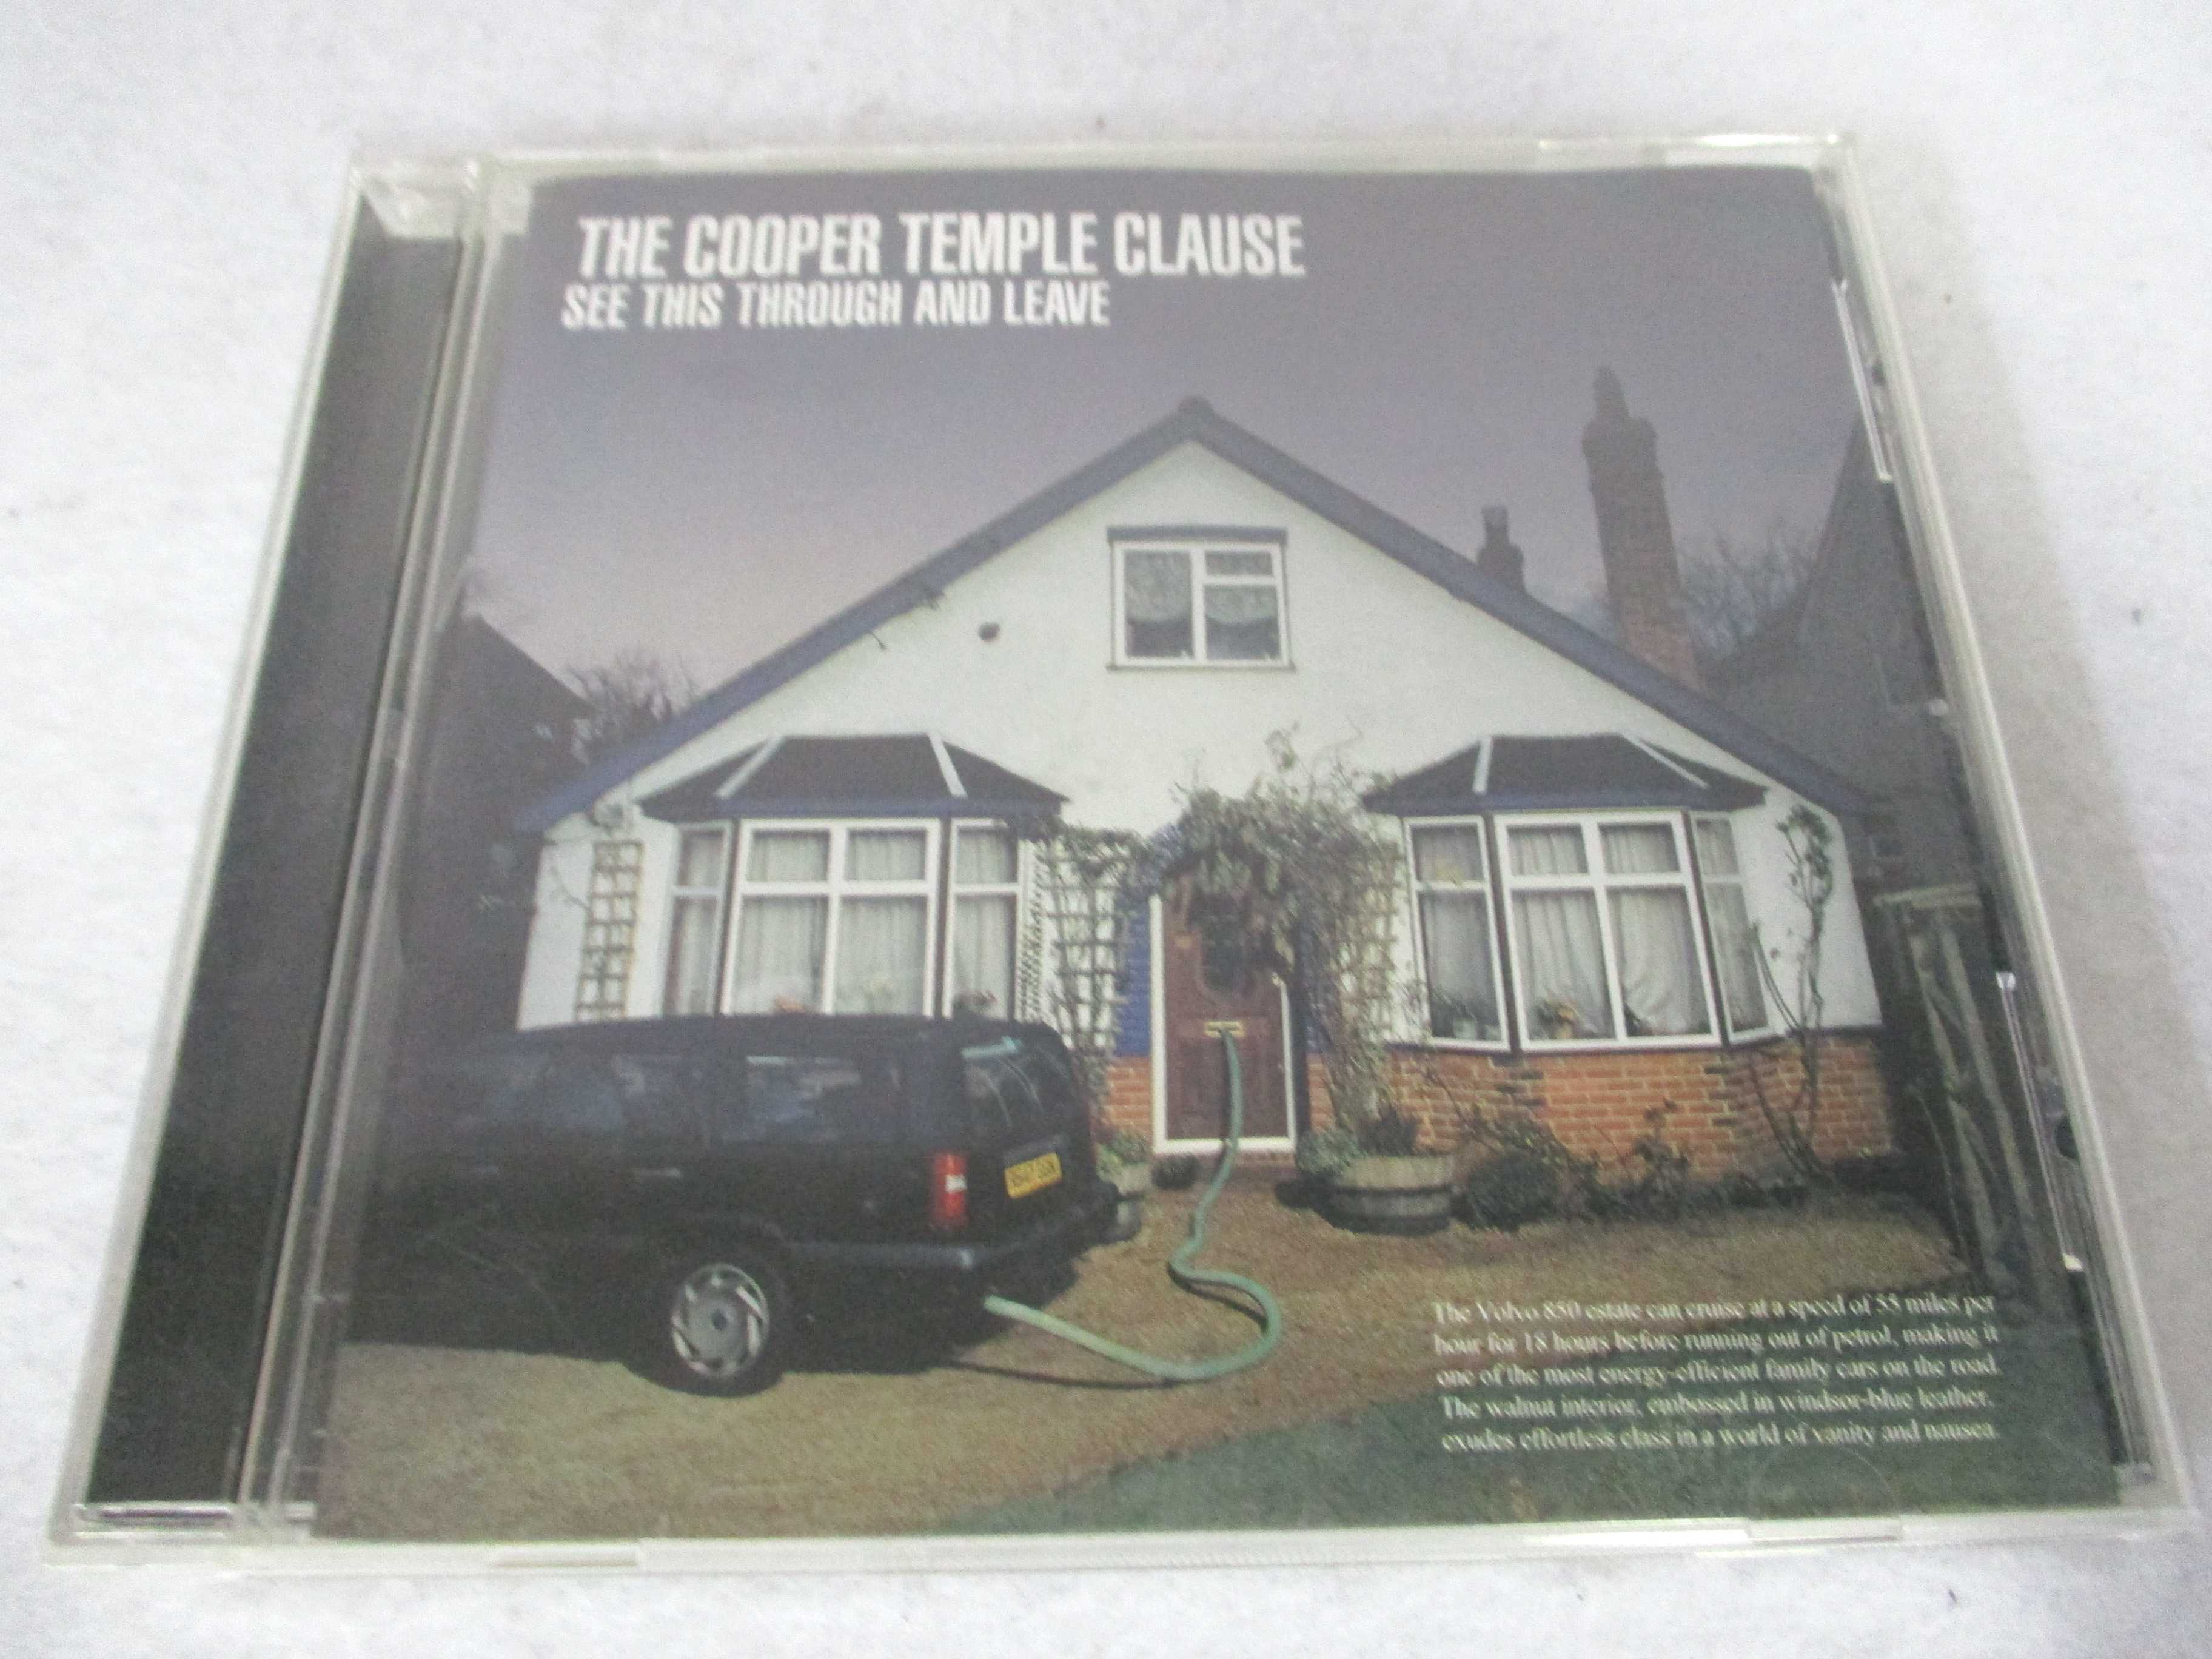 AC01548 【中古】 【CD】 See This Through And Leave 日本盤/The Cooper Temple Clause(ザ・クーパー・テンプル・クロース)